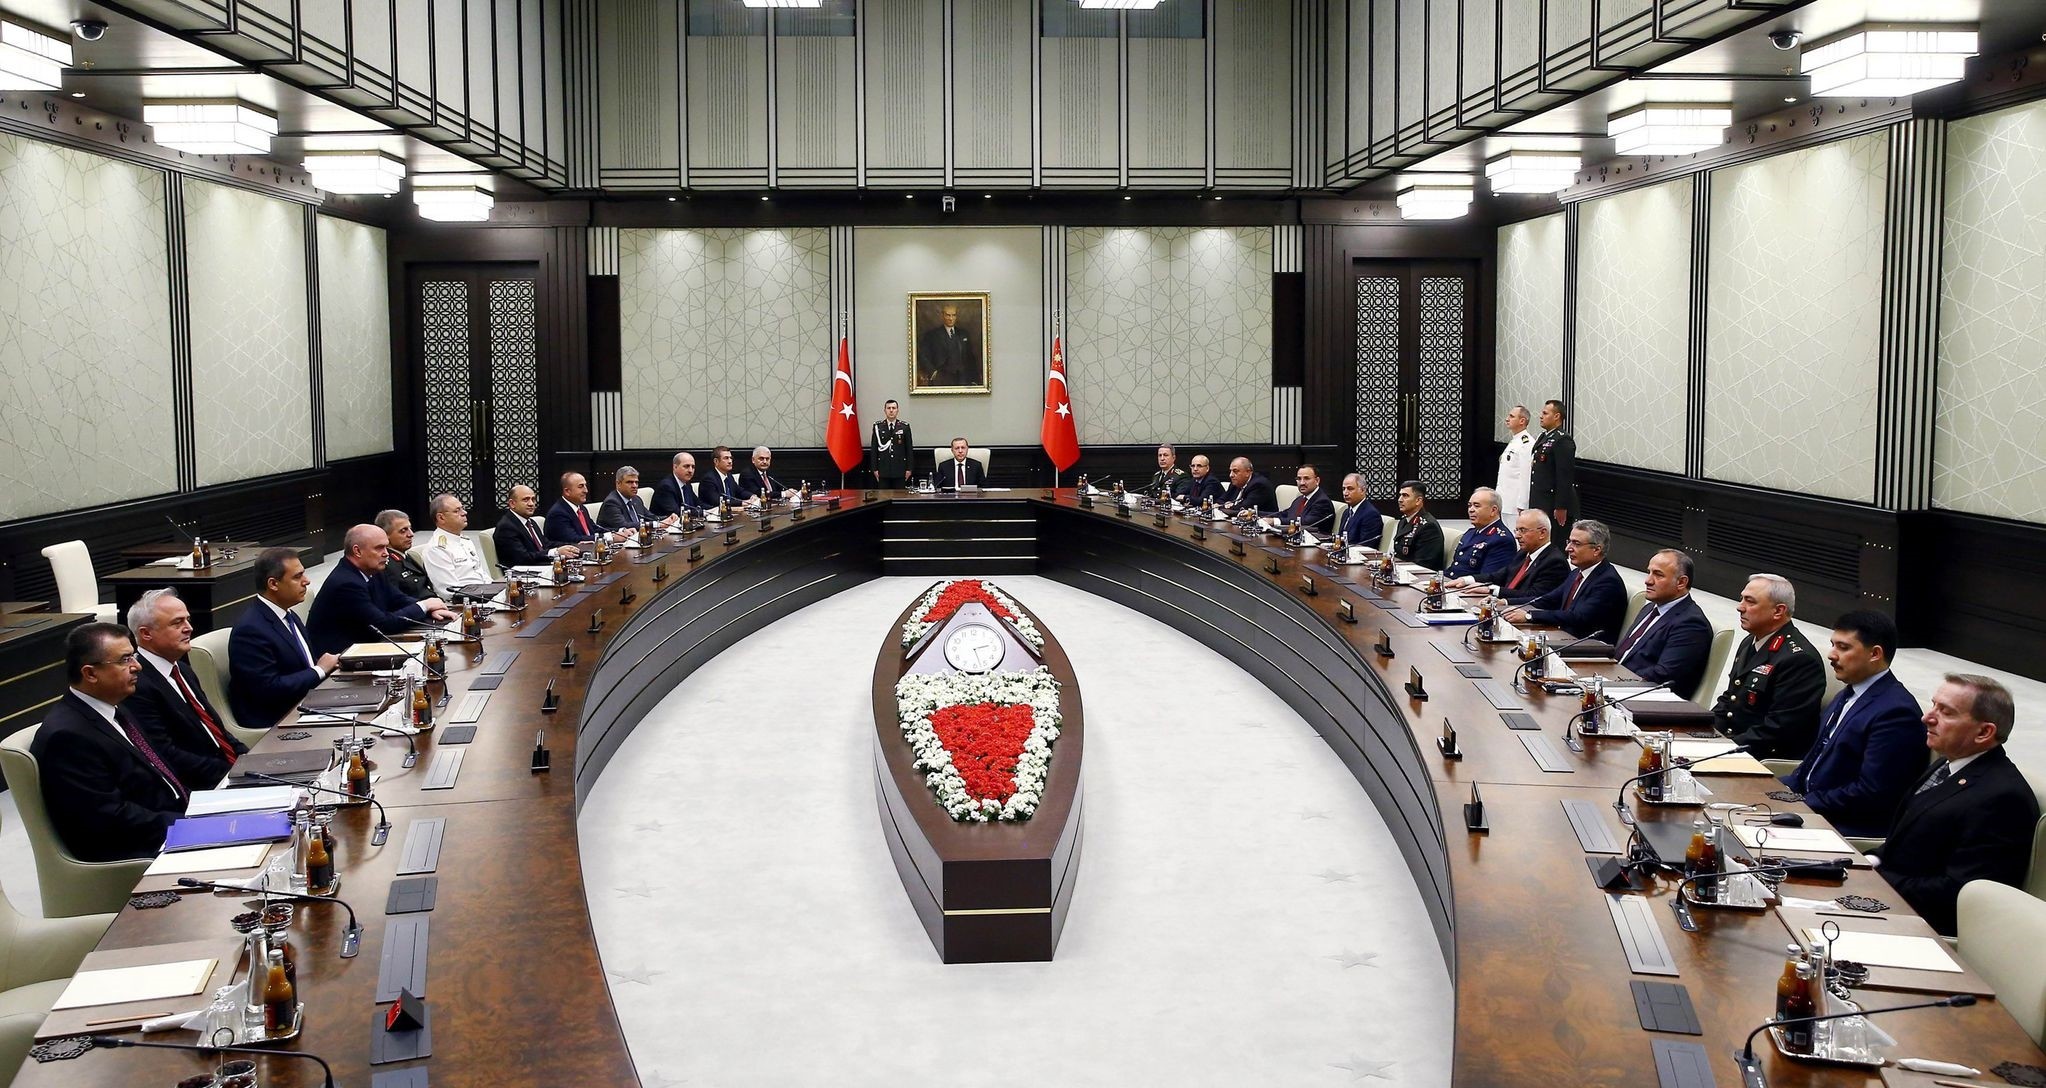 This handout photo released by the Turkish Presidential Press Office on May 26, 2016 shows Turkish President Recep Tayyip Erdogan (C) chairing a meeting of the National Security Council (MGK) at the Presidential Palace in Ankara. (AFP Photo)